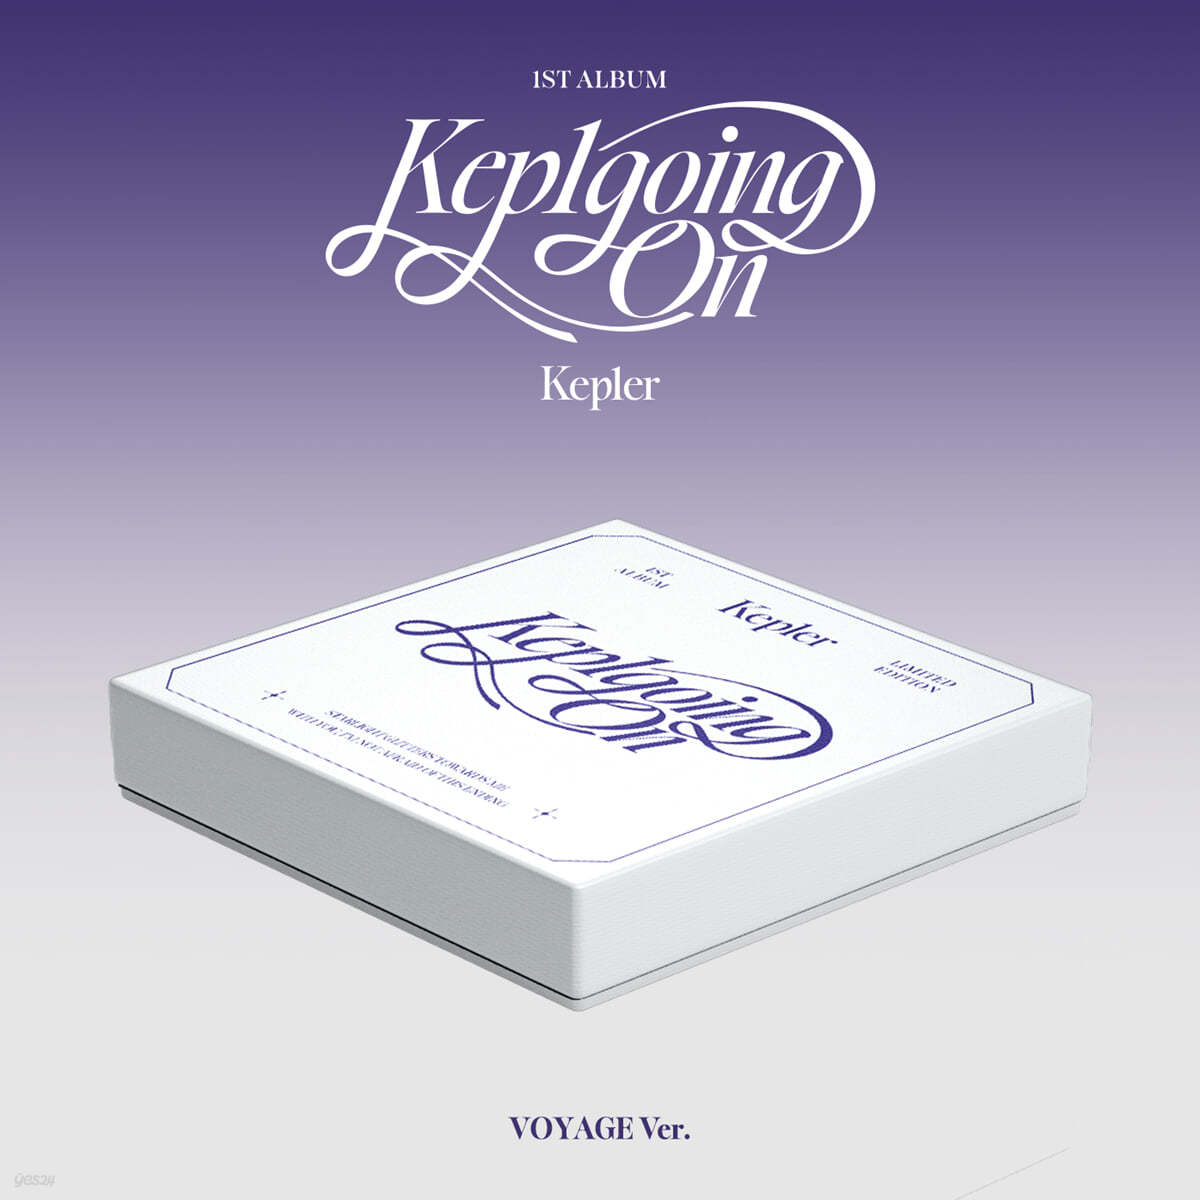 Kep1er 1st Album – Kep1going On (VOYAGE Ver.) (Limited Edition) + Yes24 POB